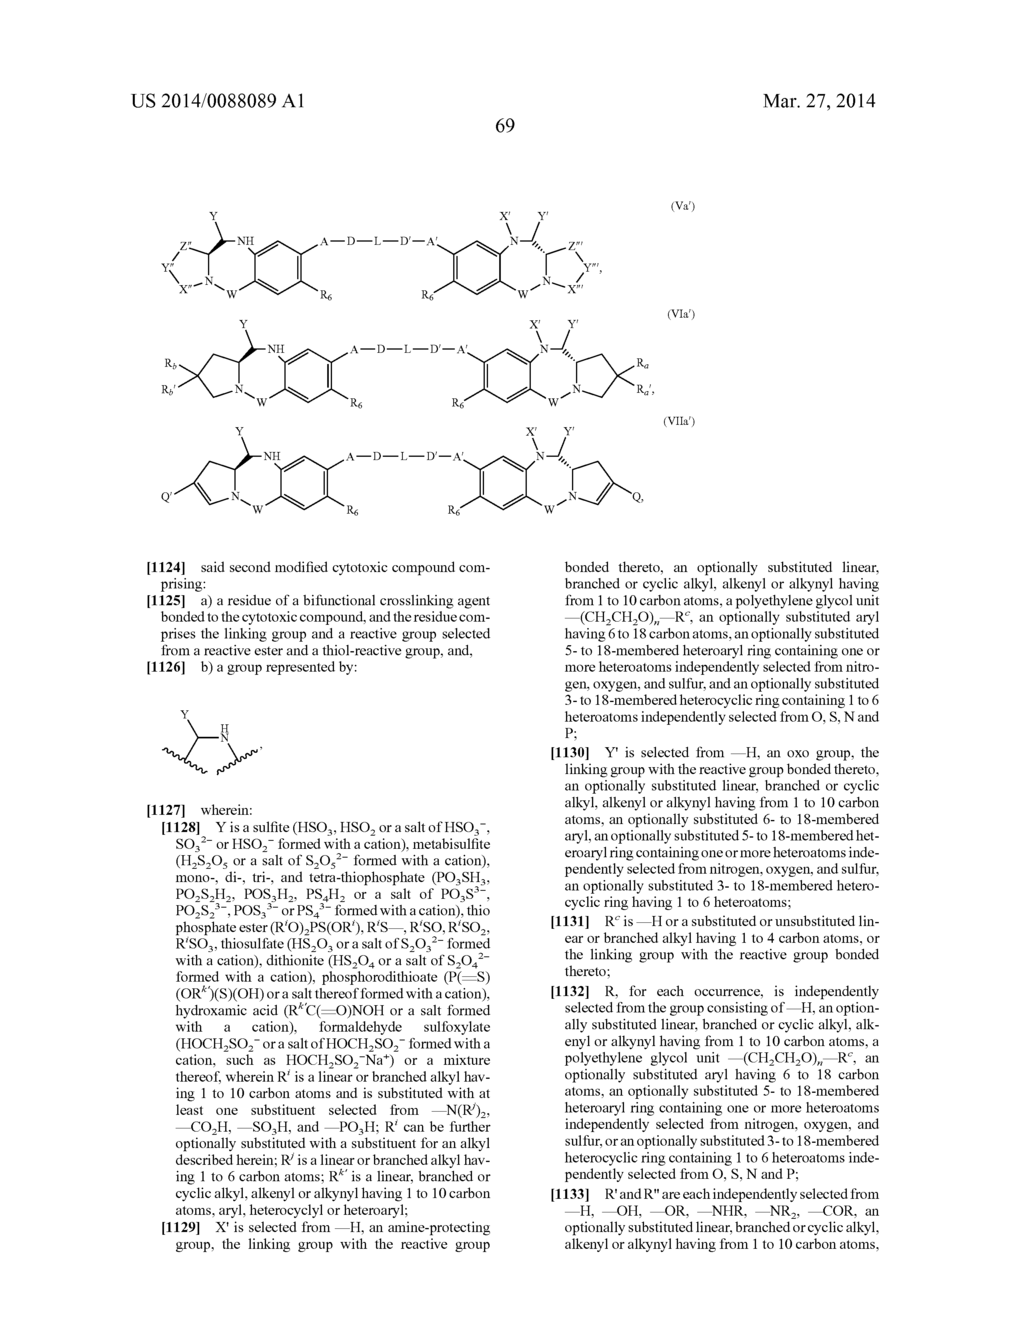 CYTOTOXIC BENZODIAZEPINE DERIVATIVES AND METHODS OF PREPARATION - diagram, schematic, and image 121